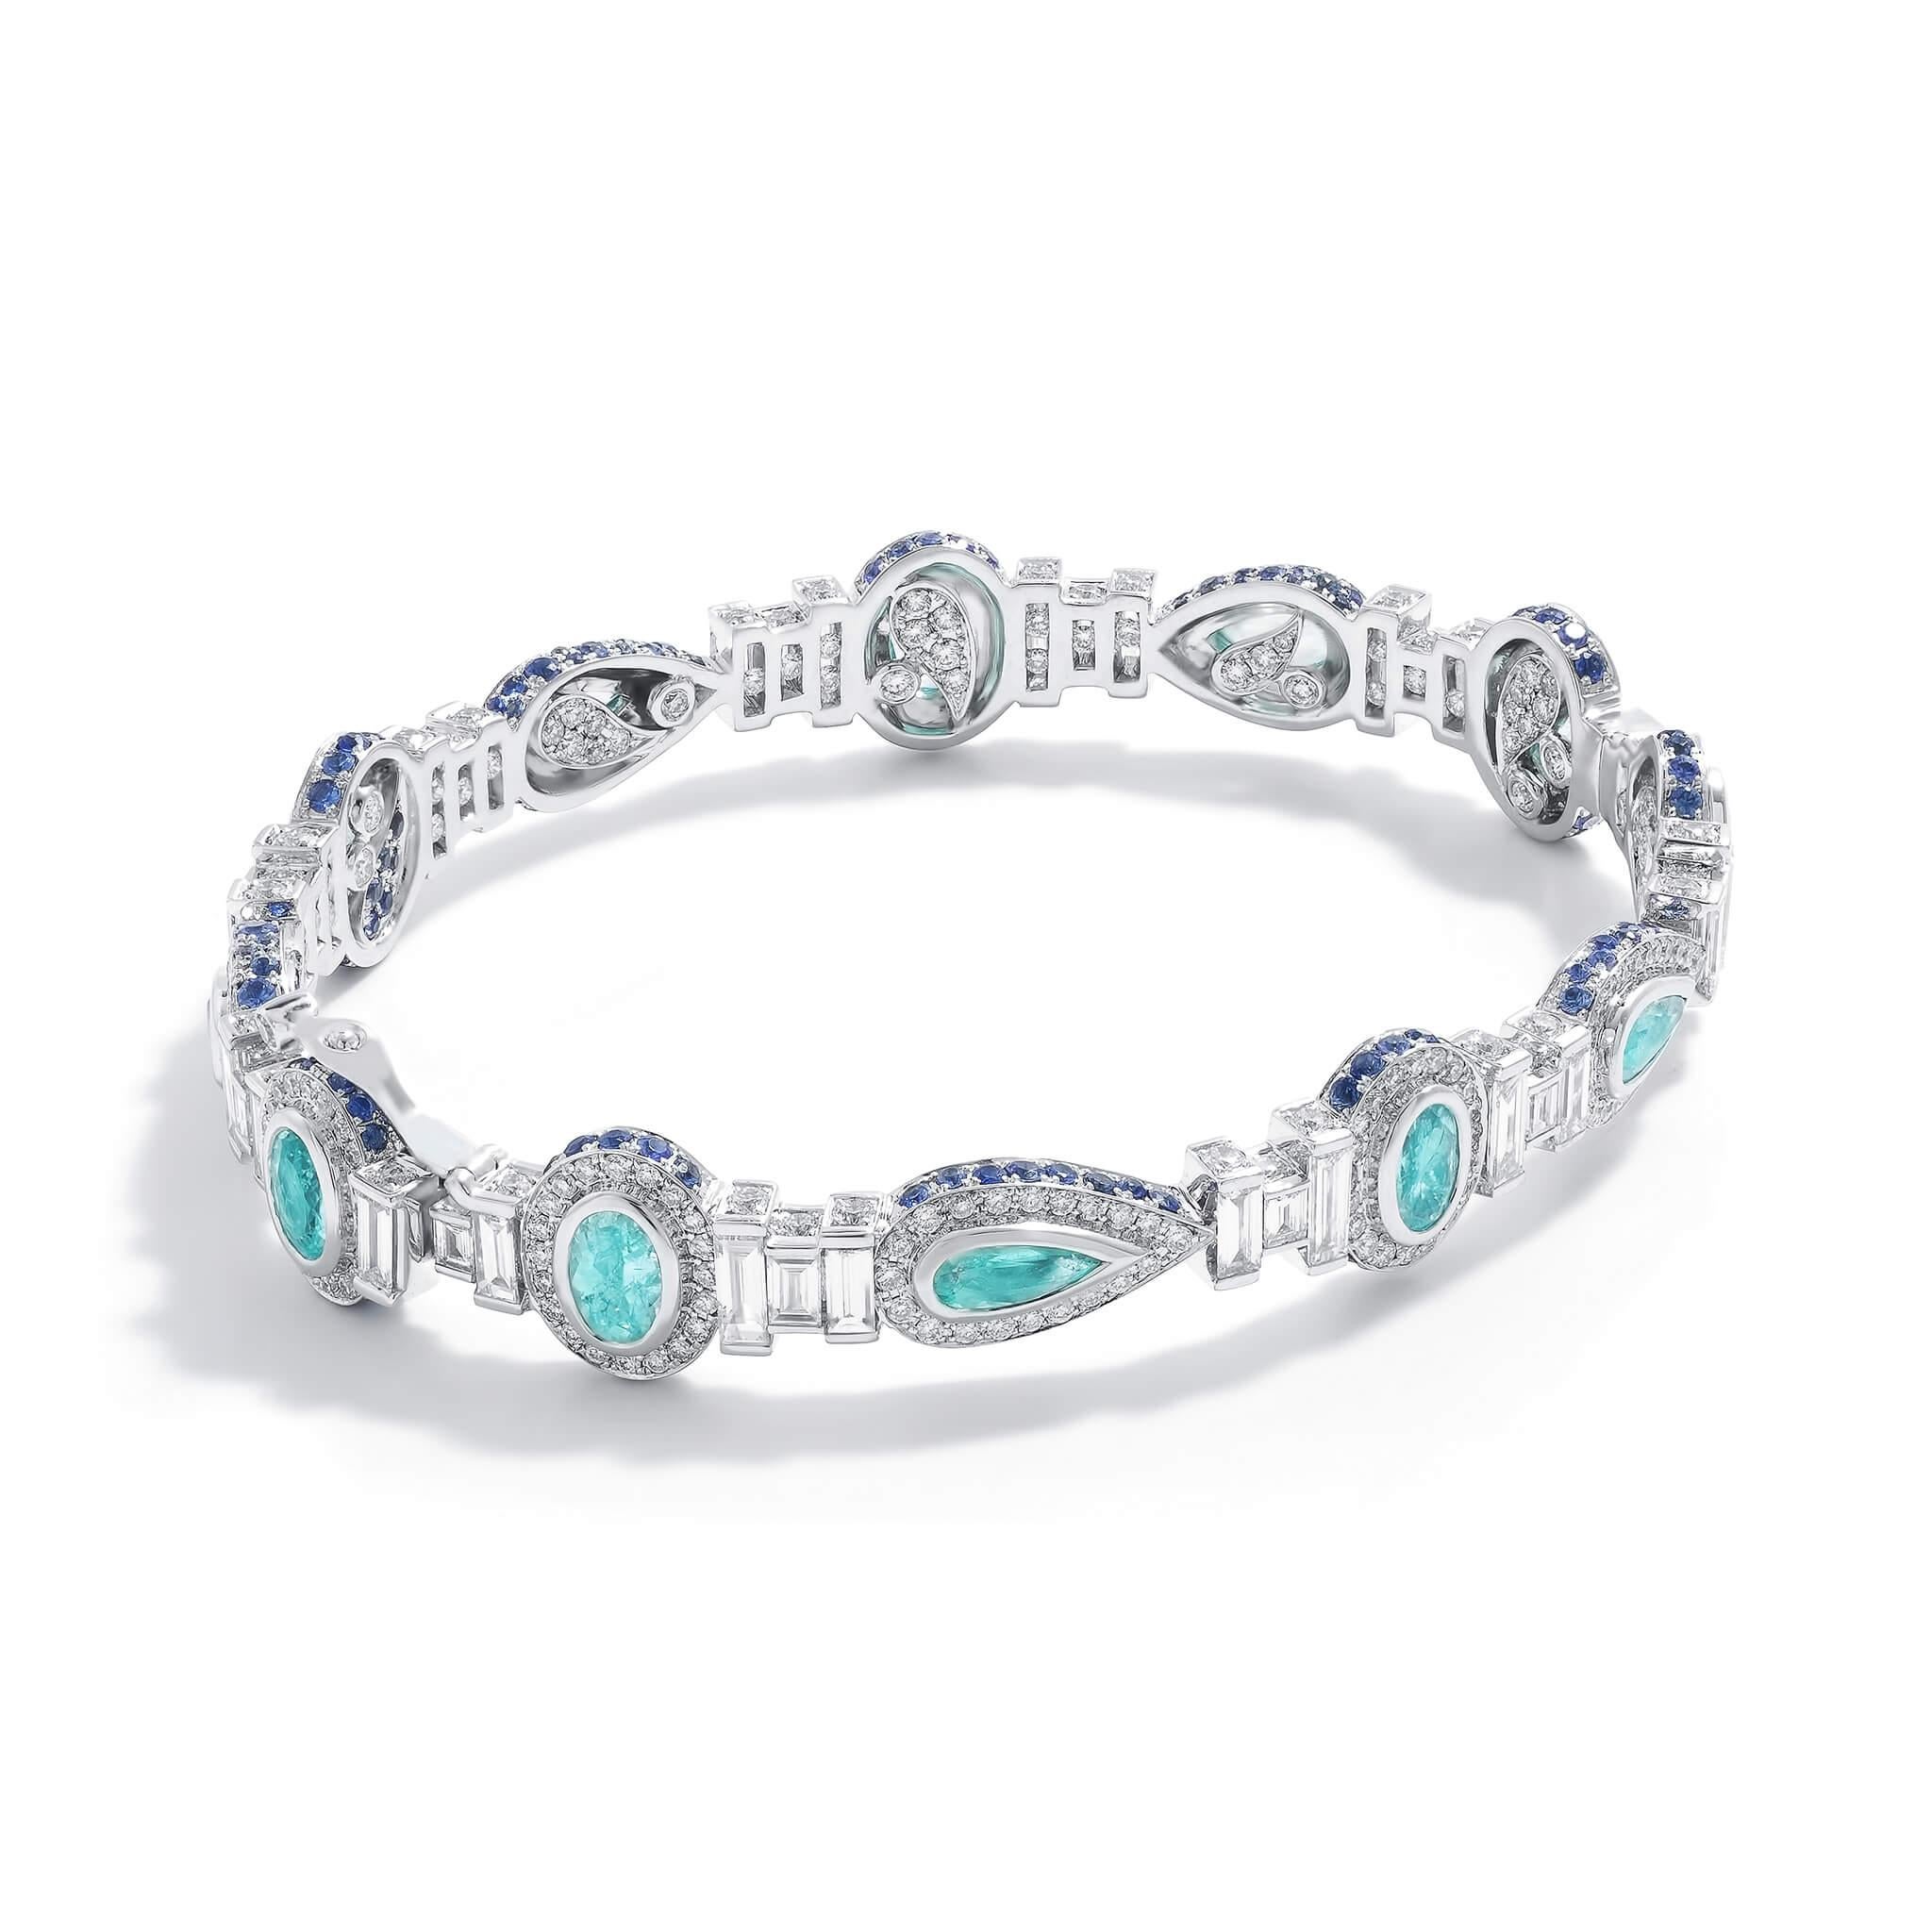 Divine 18 Karat White Gold Bracelet with finely detailed Paraiba weighing approximately 3.50 carats and Diamonds at 5.69 carats with charming Blue Sapphire weighing at 0.99 carats. This bracelet is every Paraiba admirer's dream. It is crafted